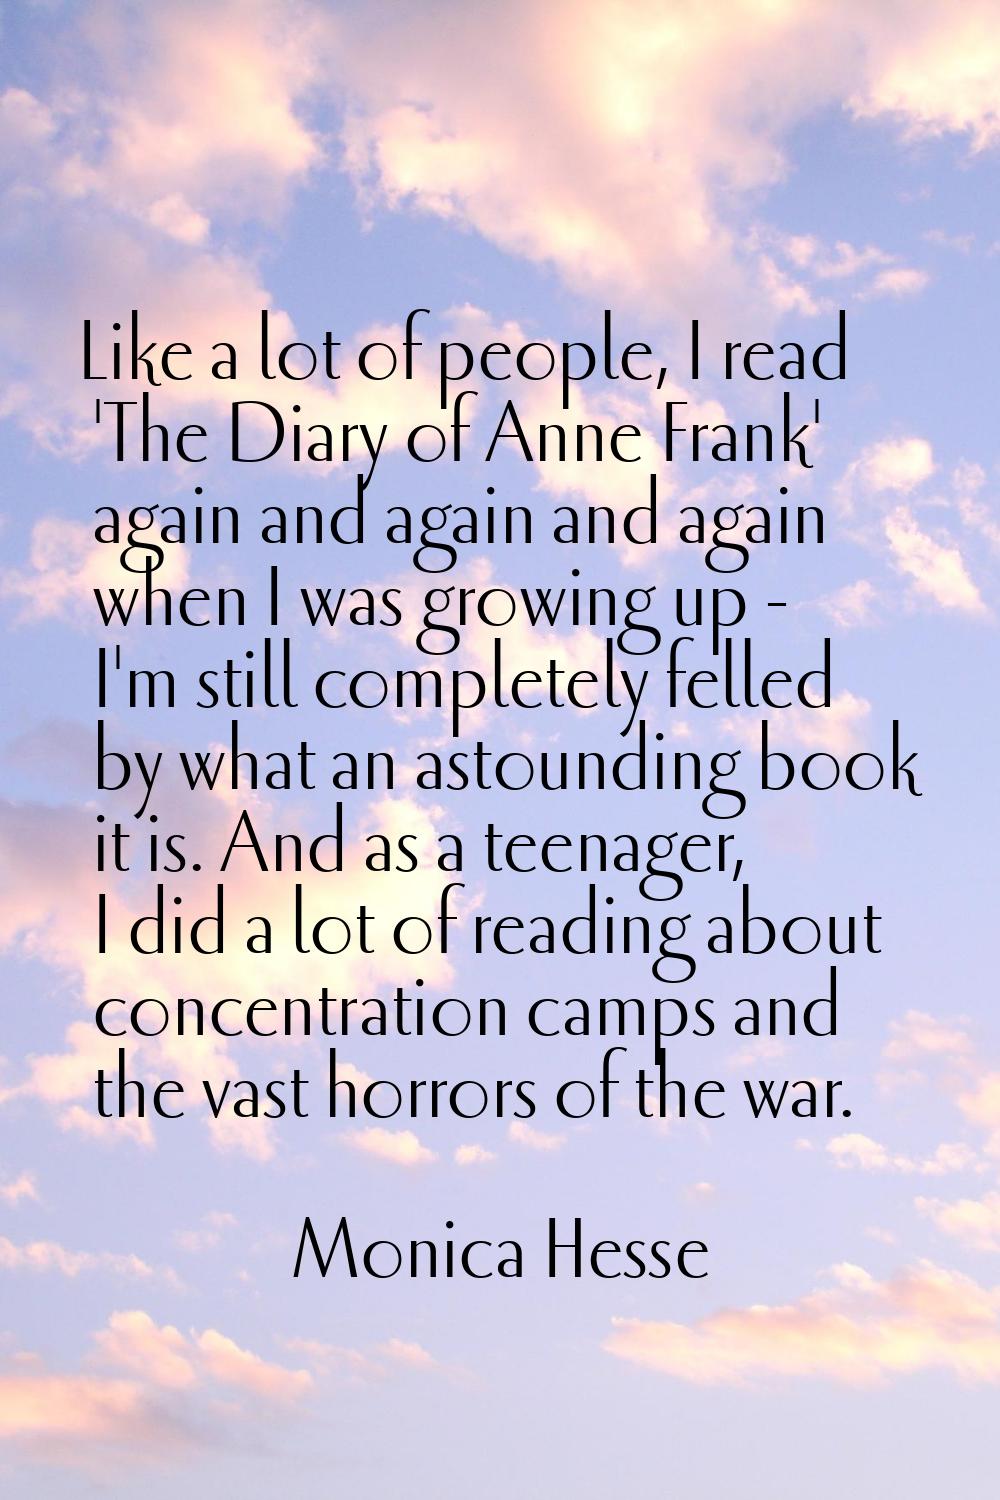 Like a lot of people, I read 'The Diary of Anne Frank' again and again and again when I was growing